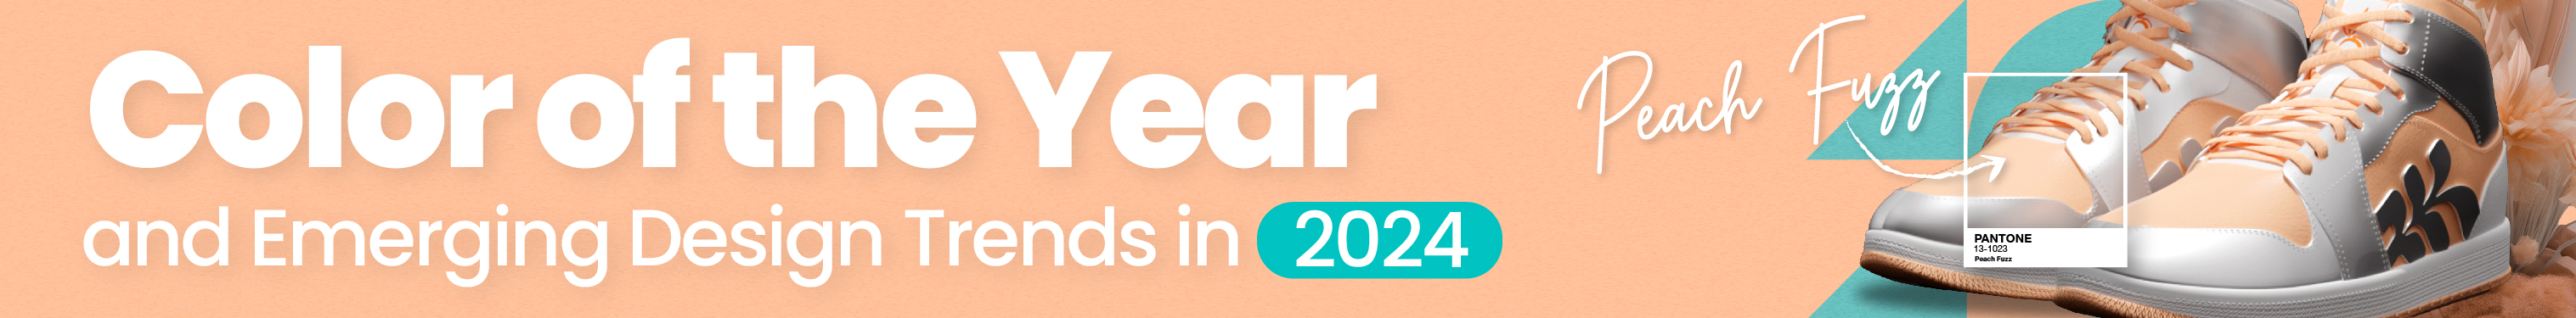 2024 design trends pantone color of the year peach fuzz ripeconcepts